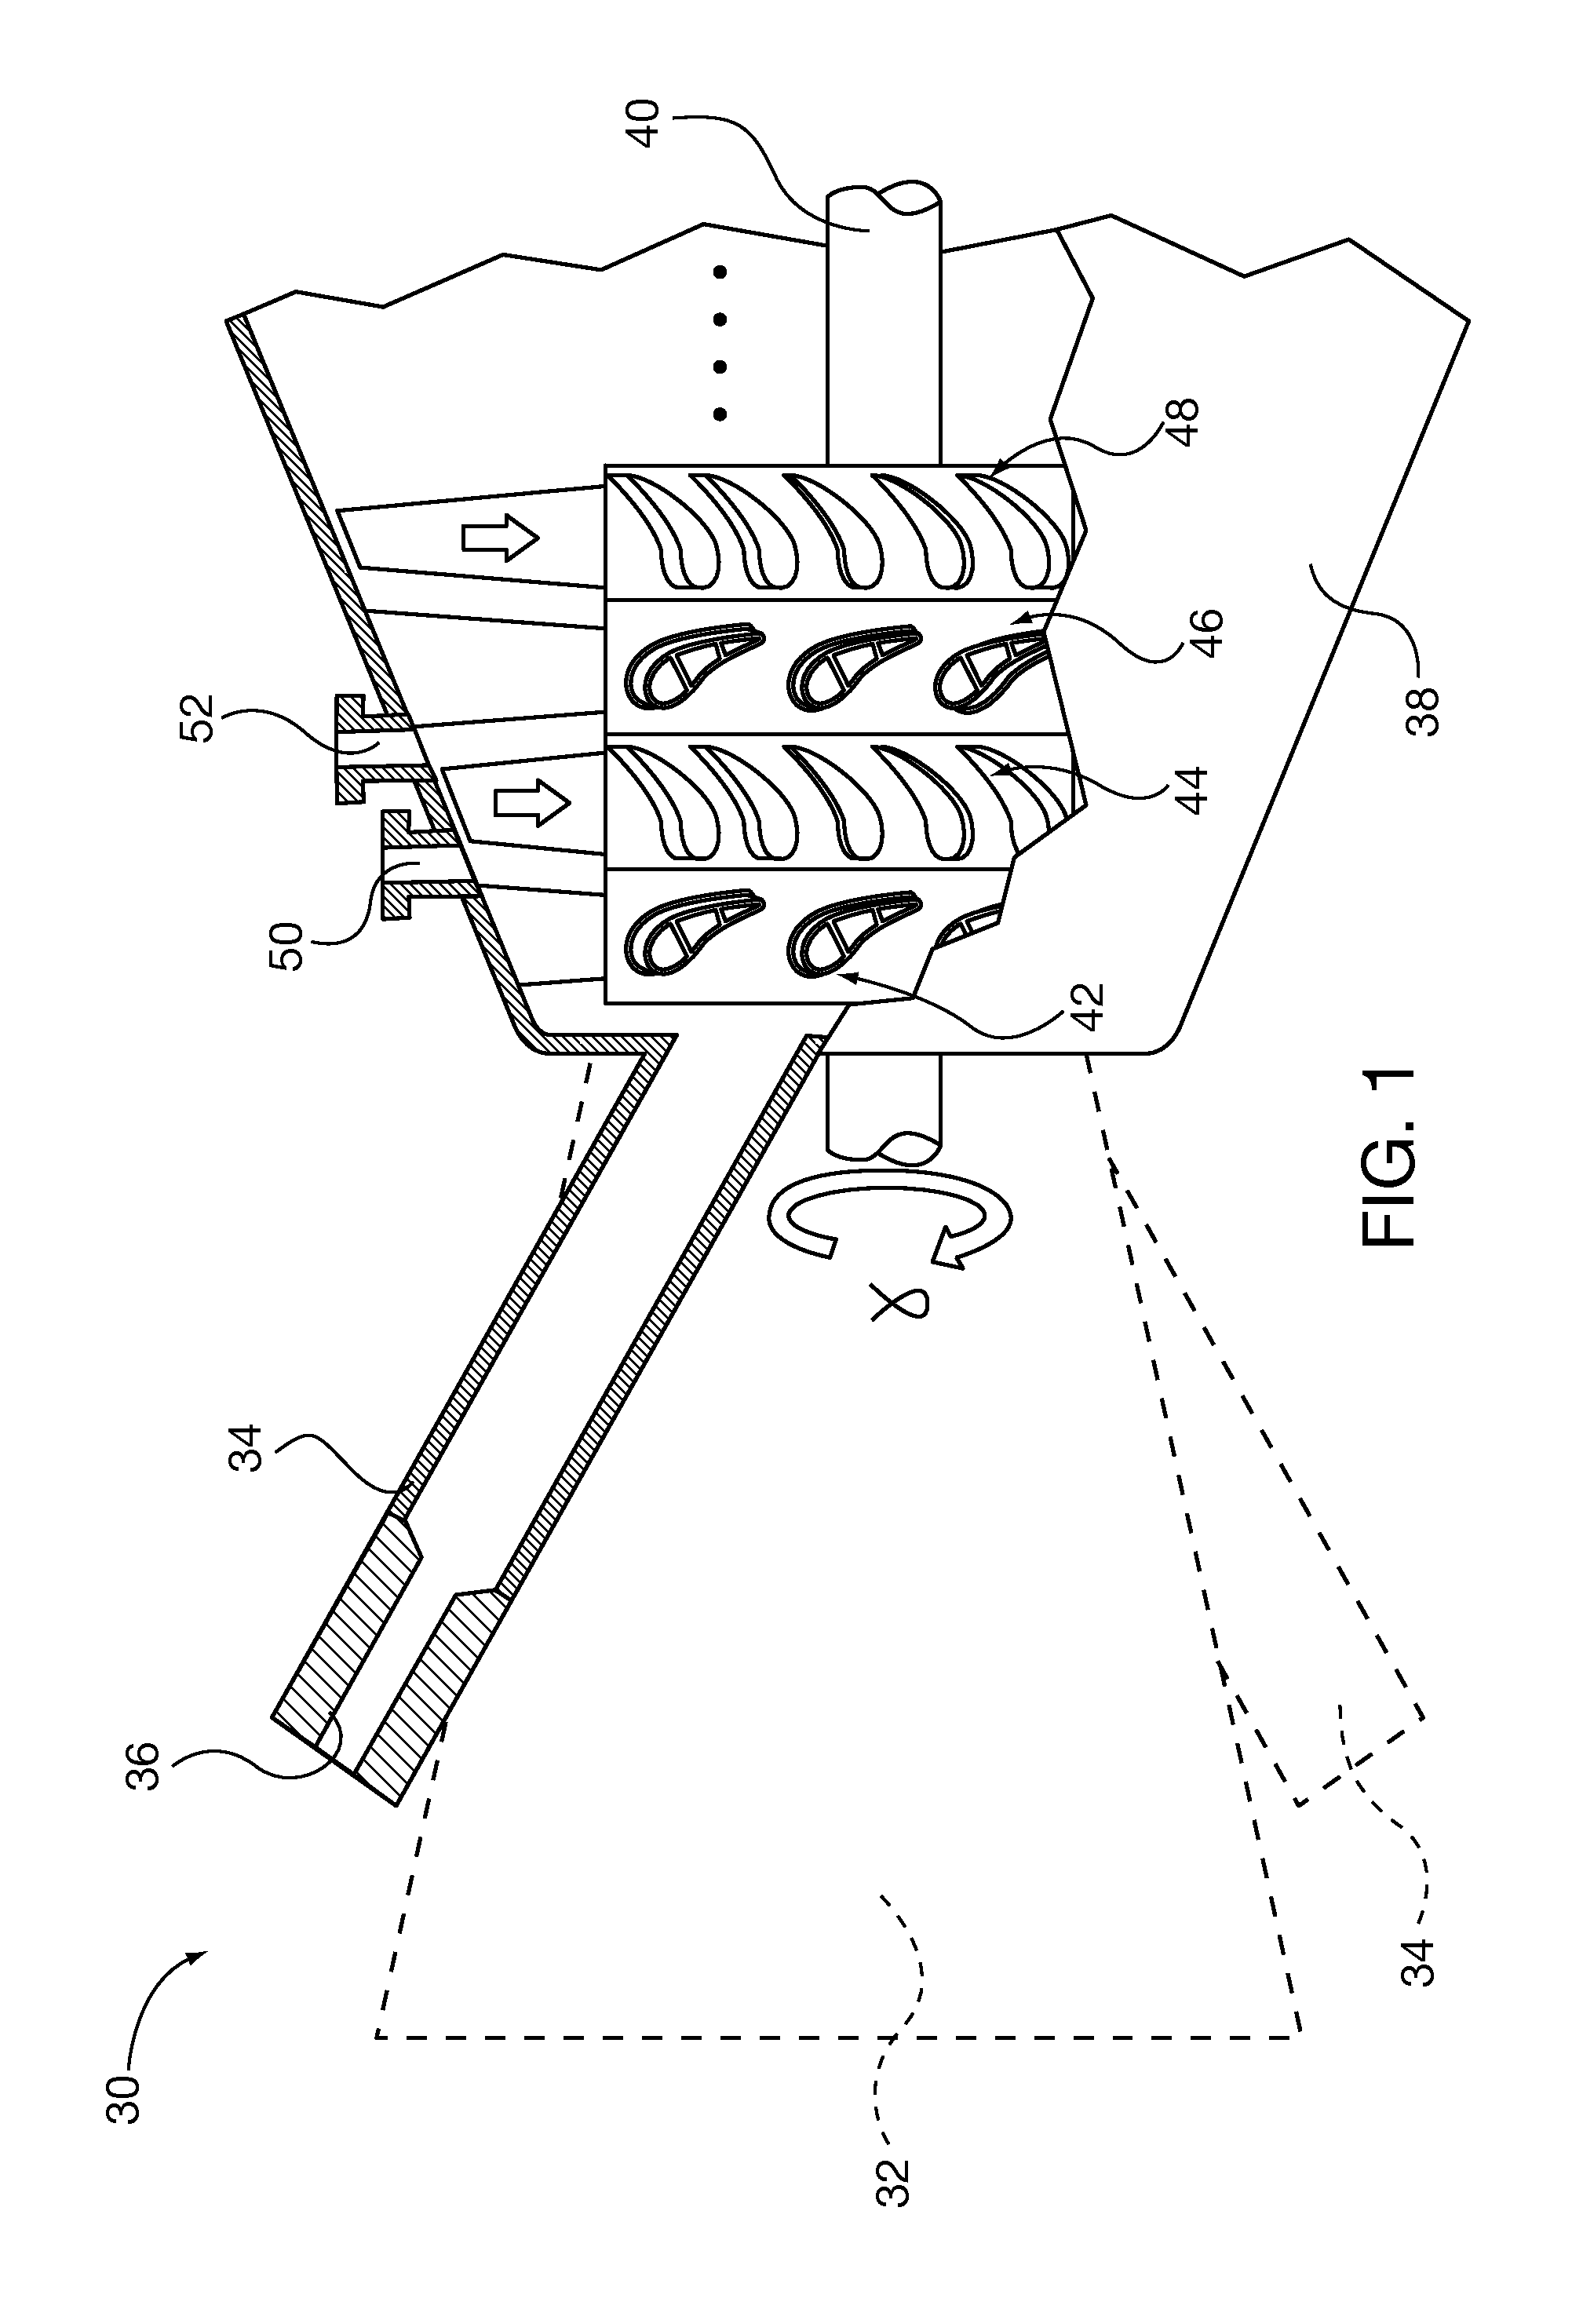 System and method for automated optical inspection of industrial gas turbines and other power  generation machinery with multi-axis inspection scope